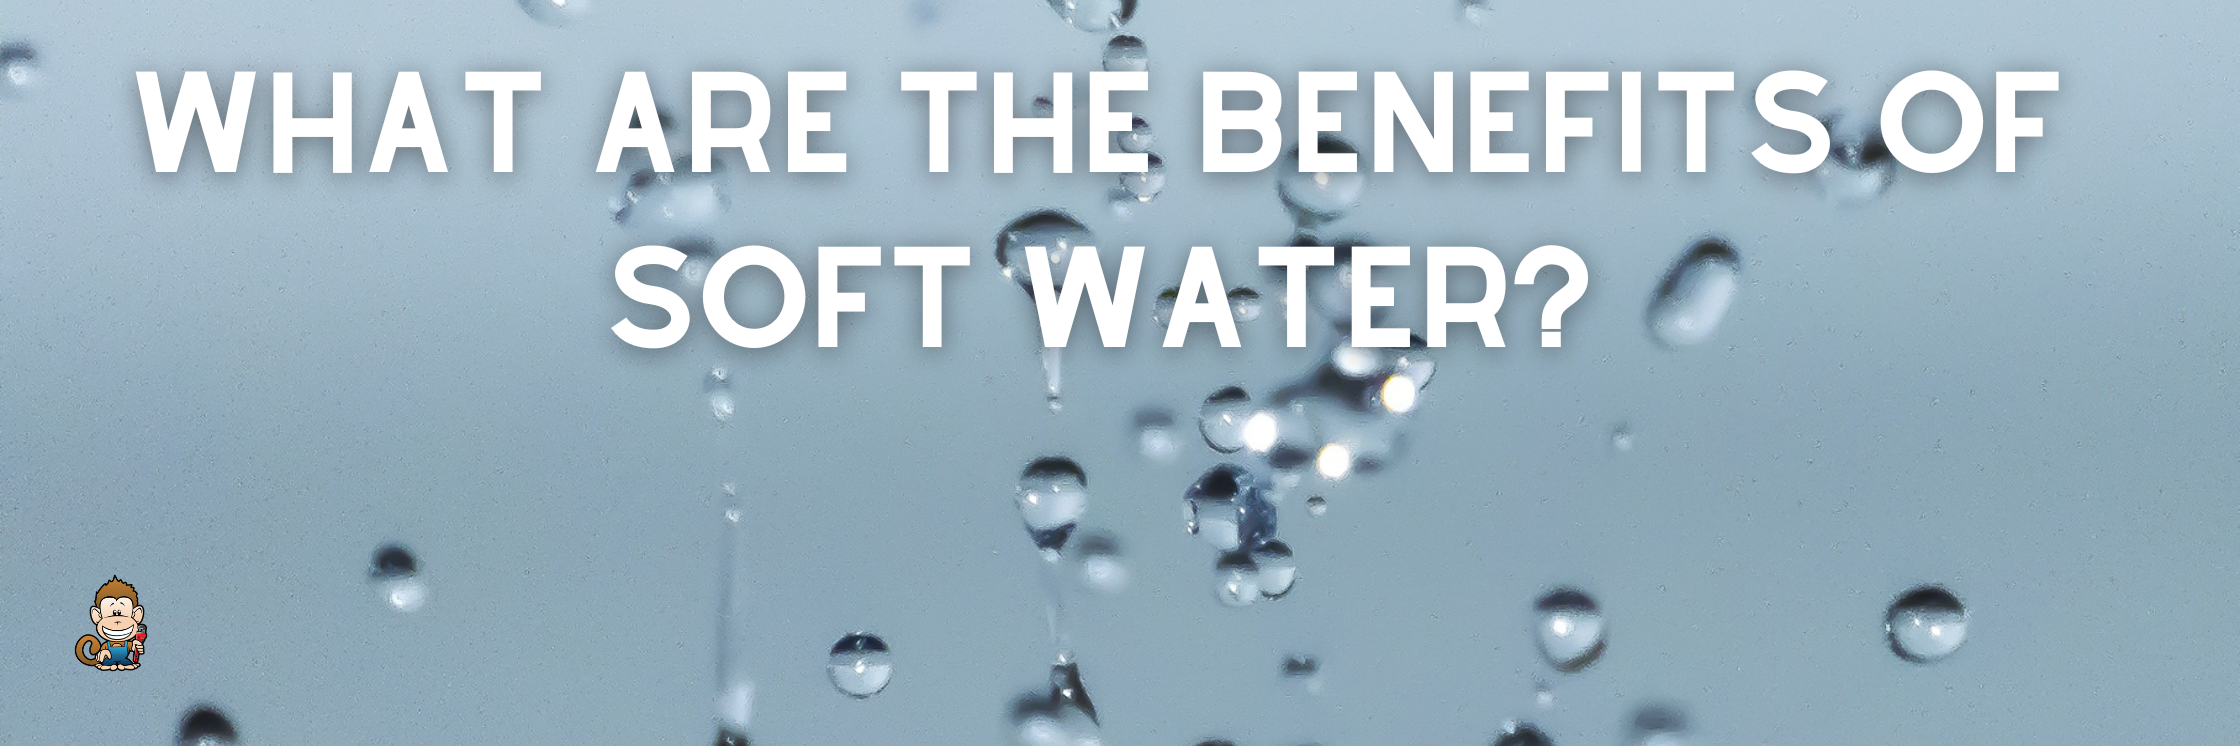 What Are The Benefits of Soft Water?